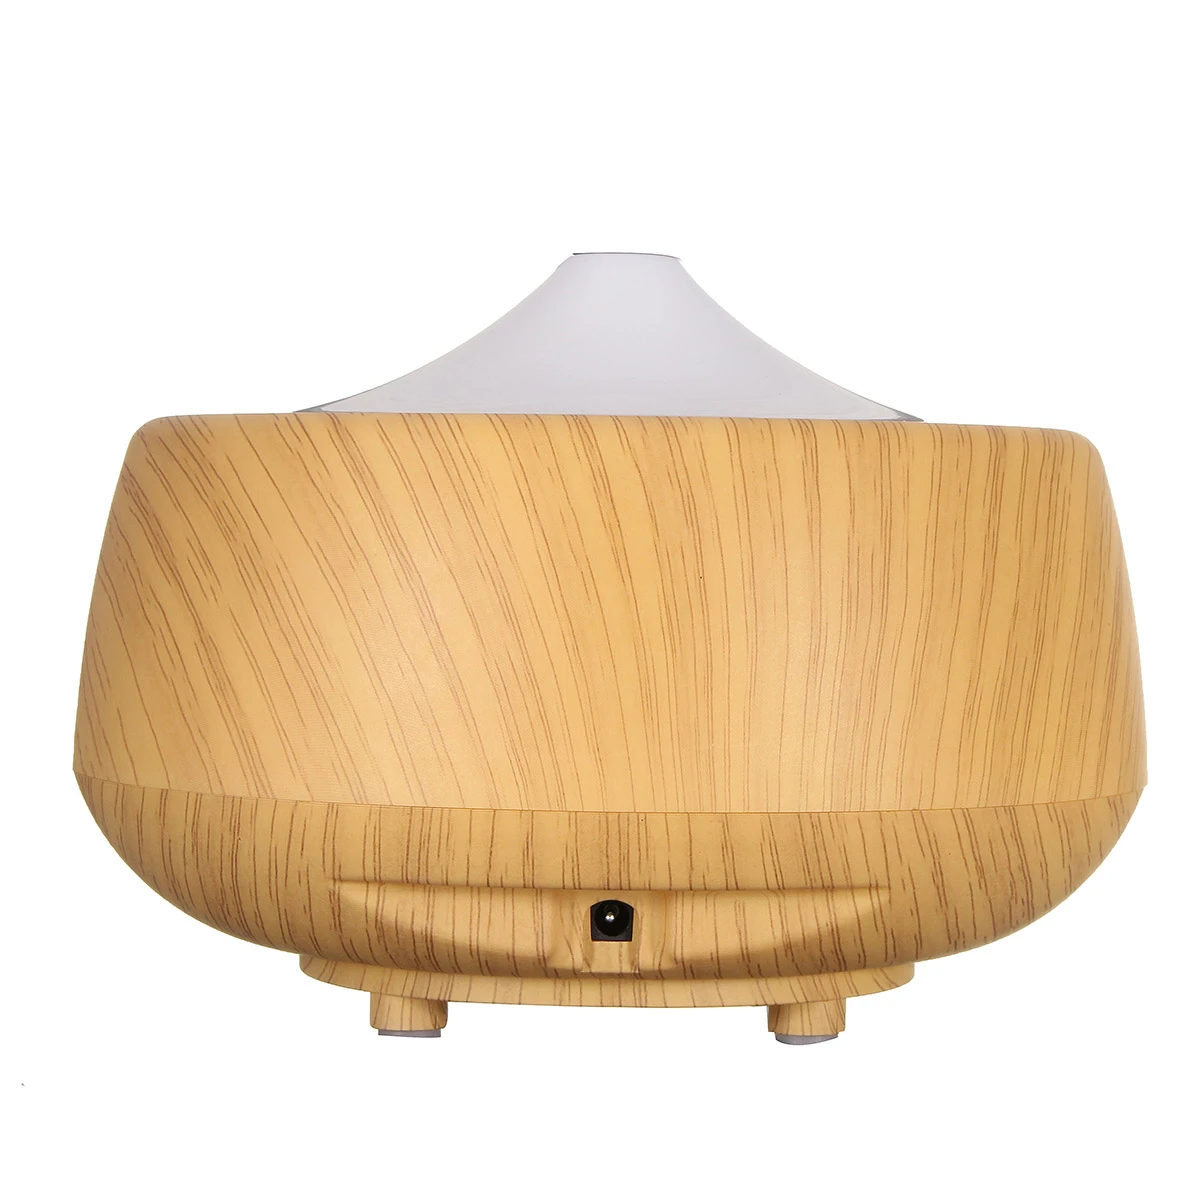 Ultrasonic Color-changing Wood Grain LED Aroma Diffuser Humidifier Aromatherapy Spa Essential Oil